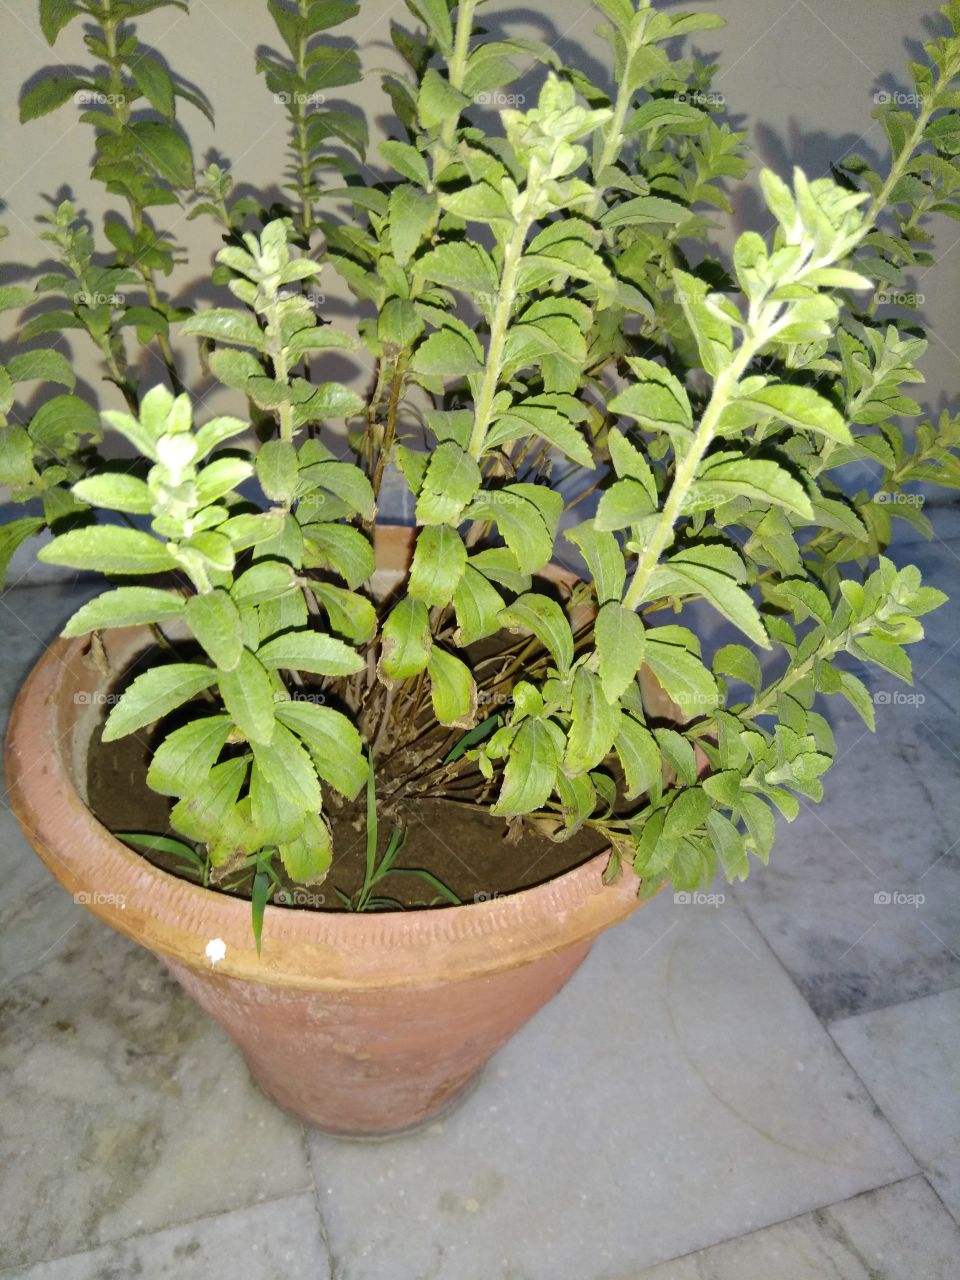 Stevie is only the one plant which is easy to grow and used for curing diabetes. And it's effective as well. This is a home made remedies. Ayurvedic Doctors recommends this for good health.